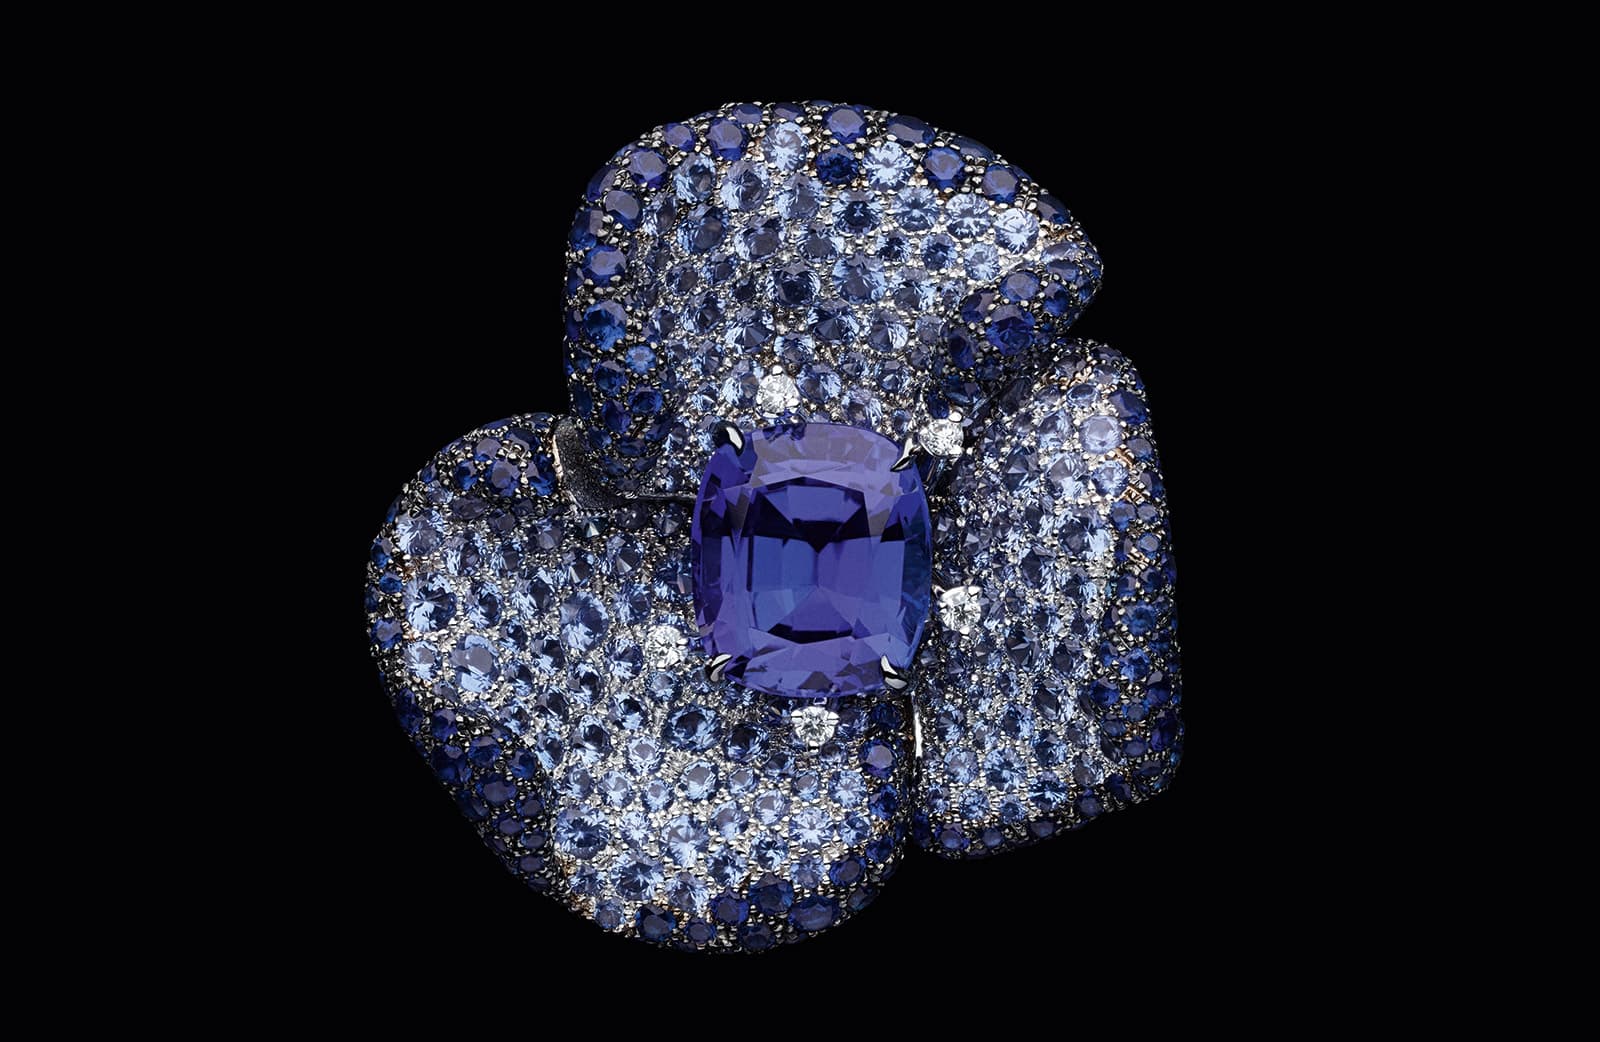 RoseDior ring in white gold with 3.43 cts cushion-cut tanzanite, diamonds, and sapphires